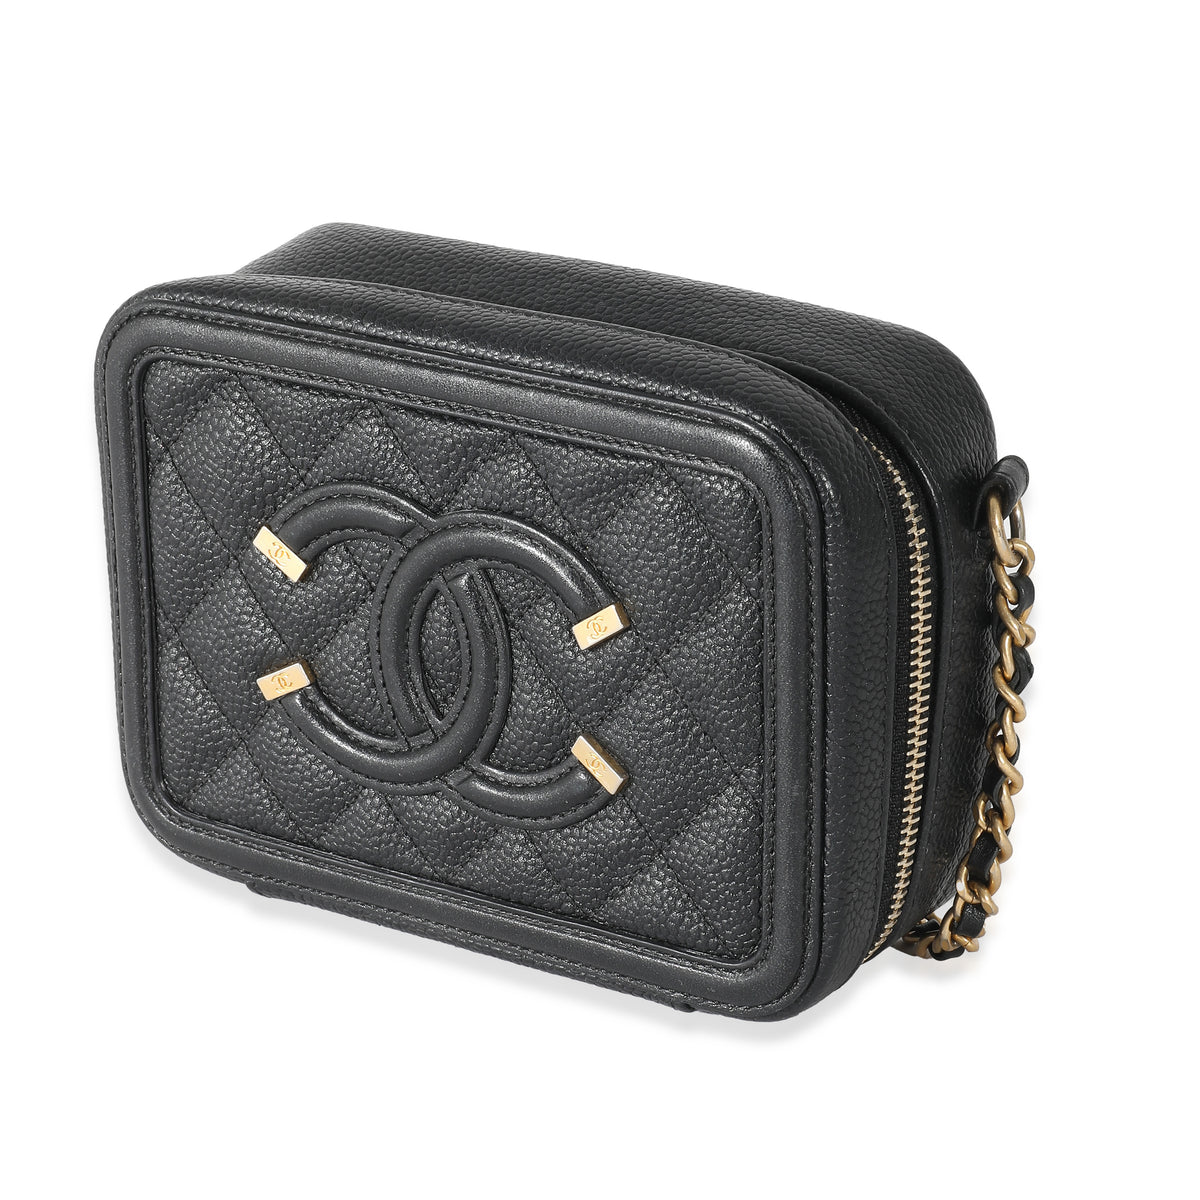 CHANEL Caviar Quilted Small CC Filigree Vanity Case Beige Black, FASHIONPHILE